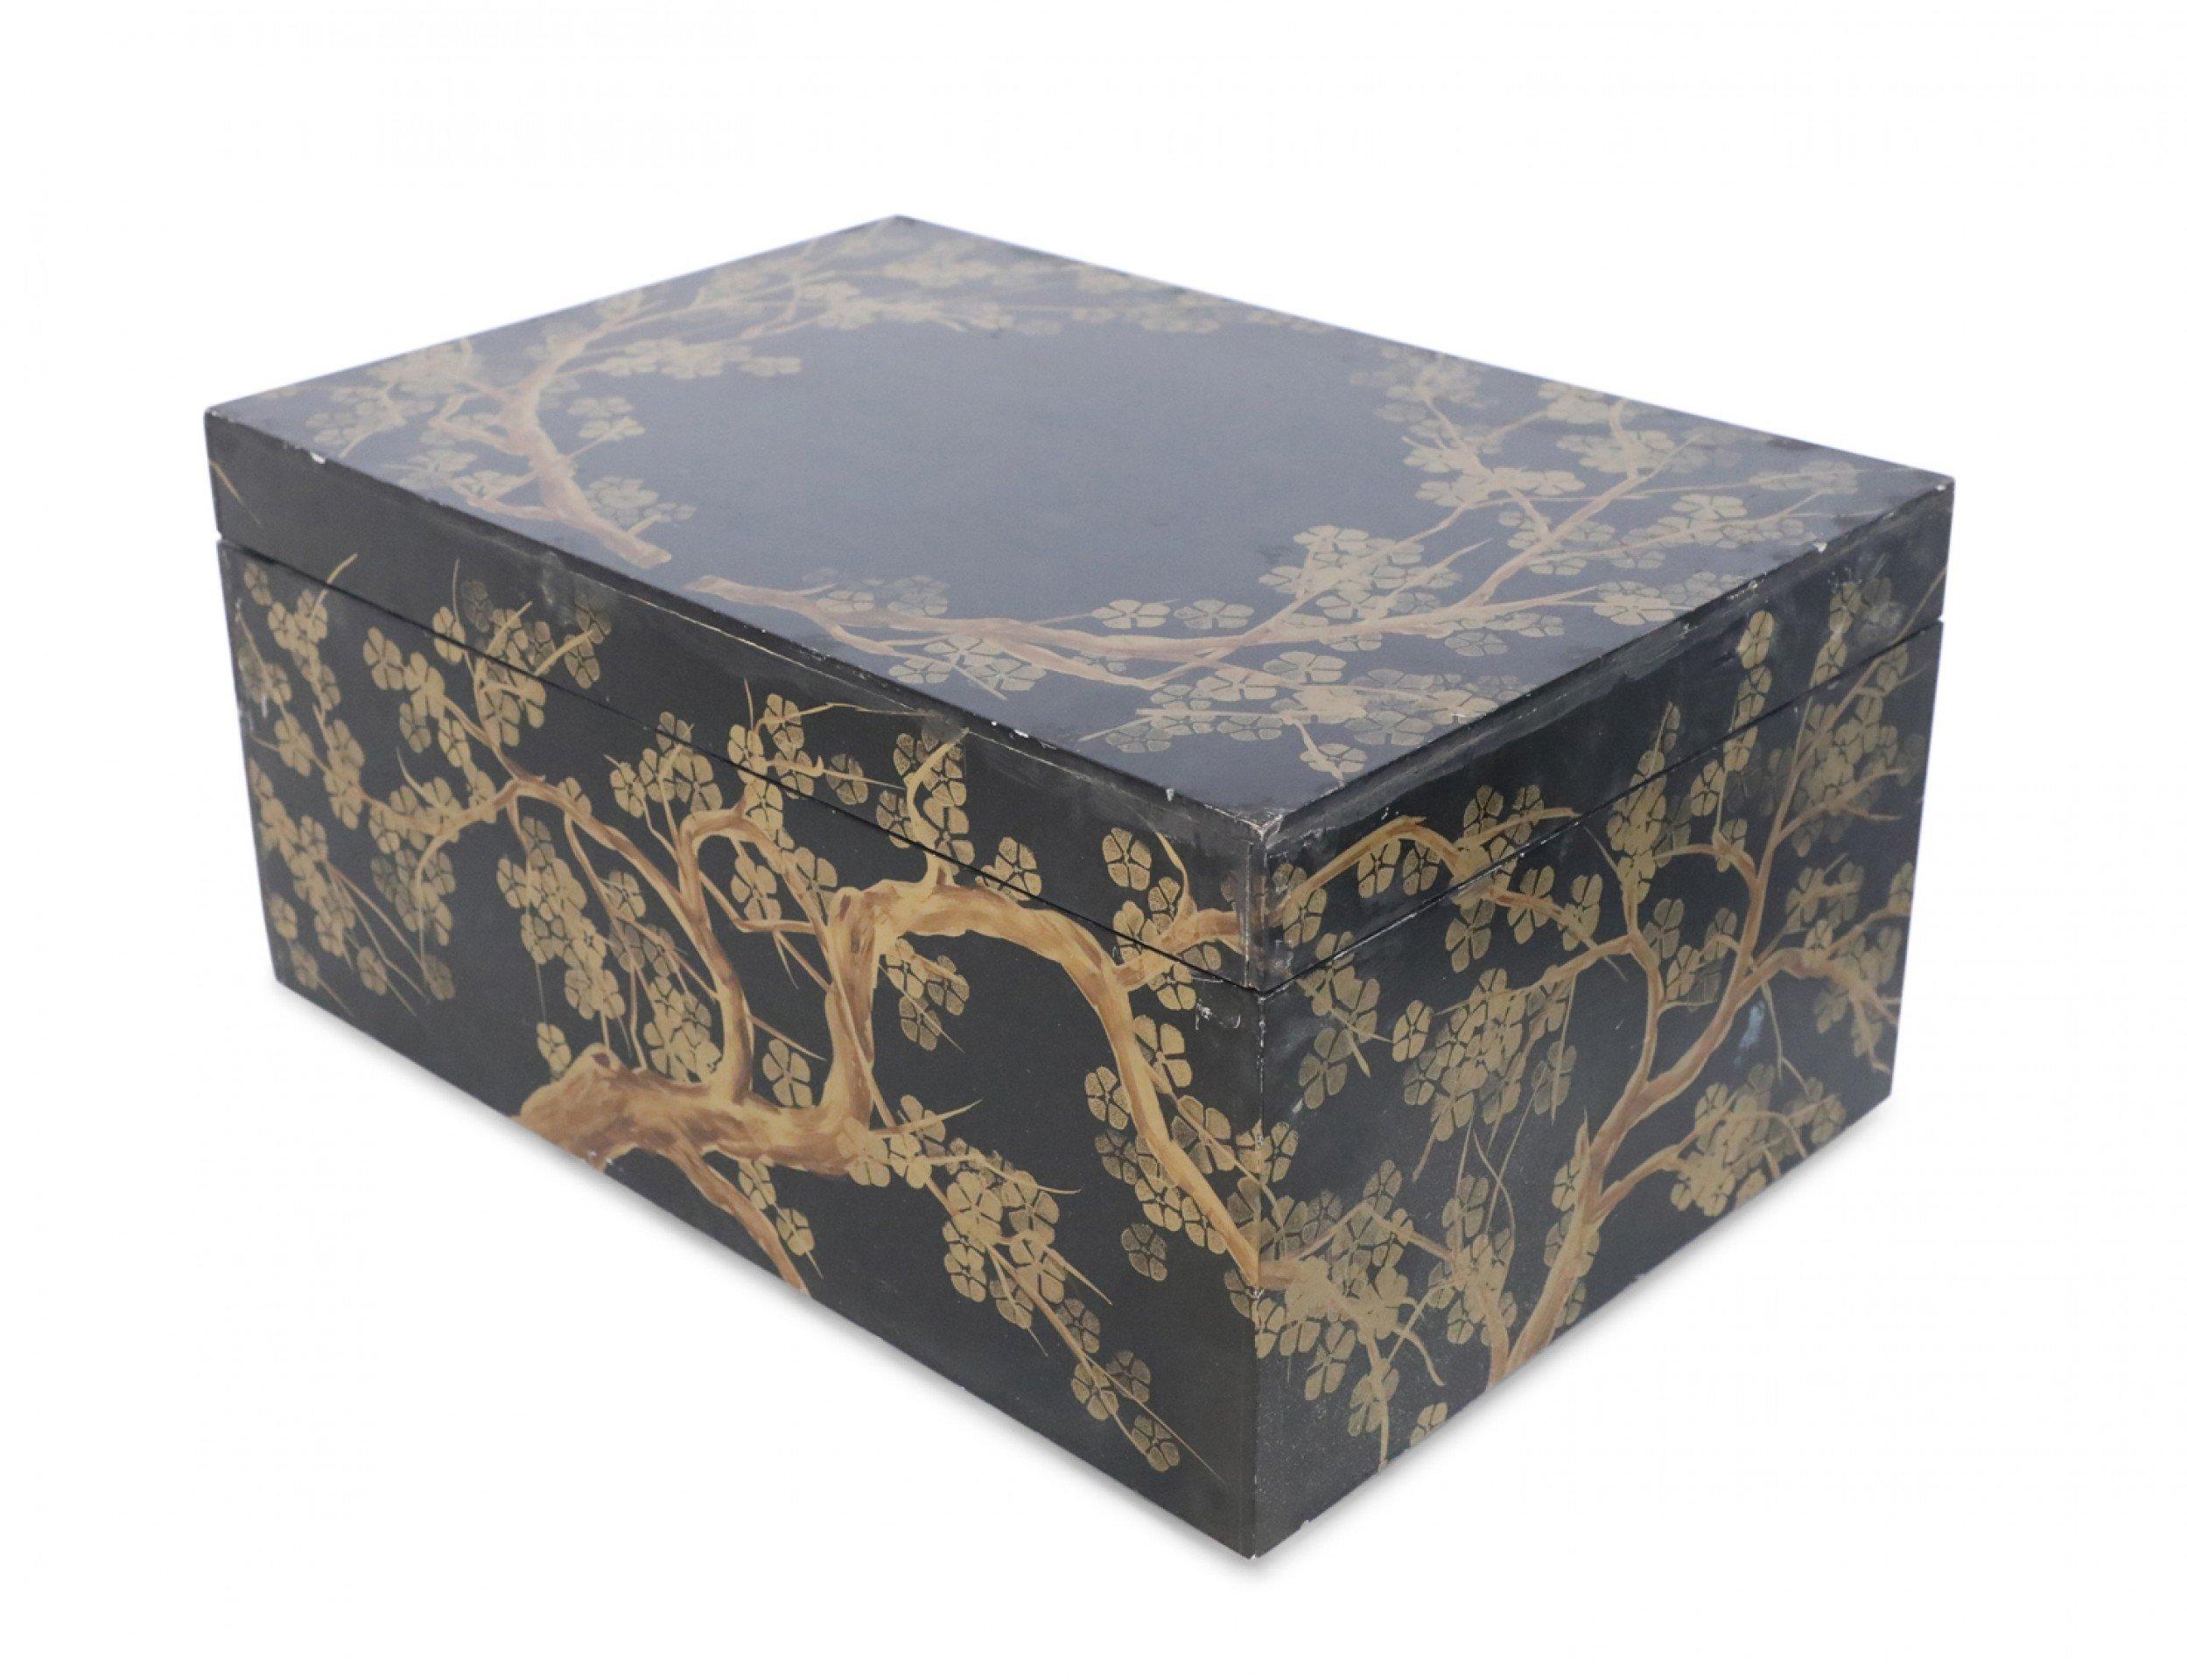 Chinese large decorative wooden box with gold cherry blossom design on top and sides against a black background, with a hinged lid, and small hidden feet.
 